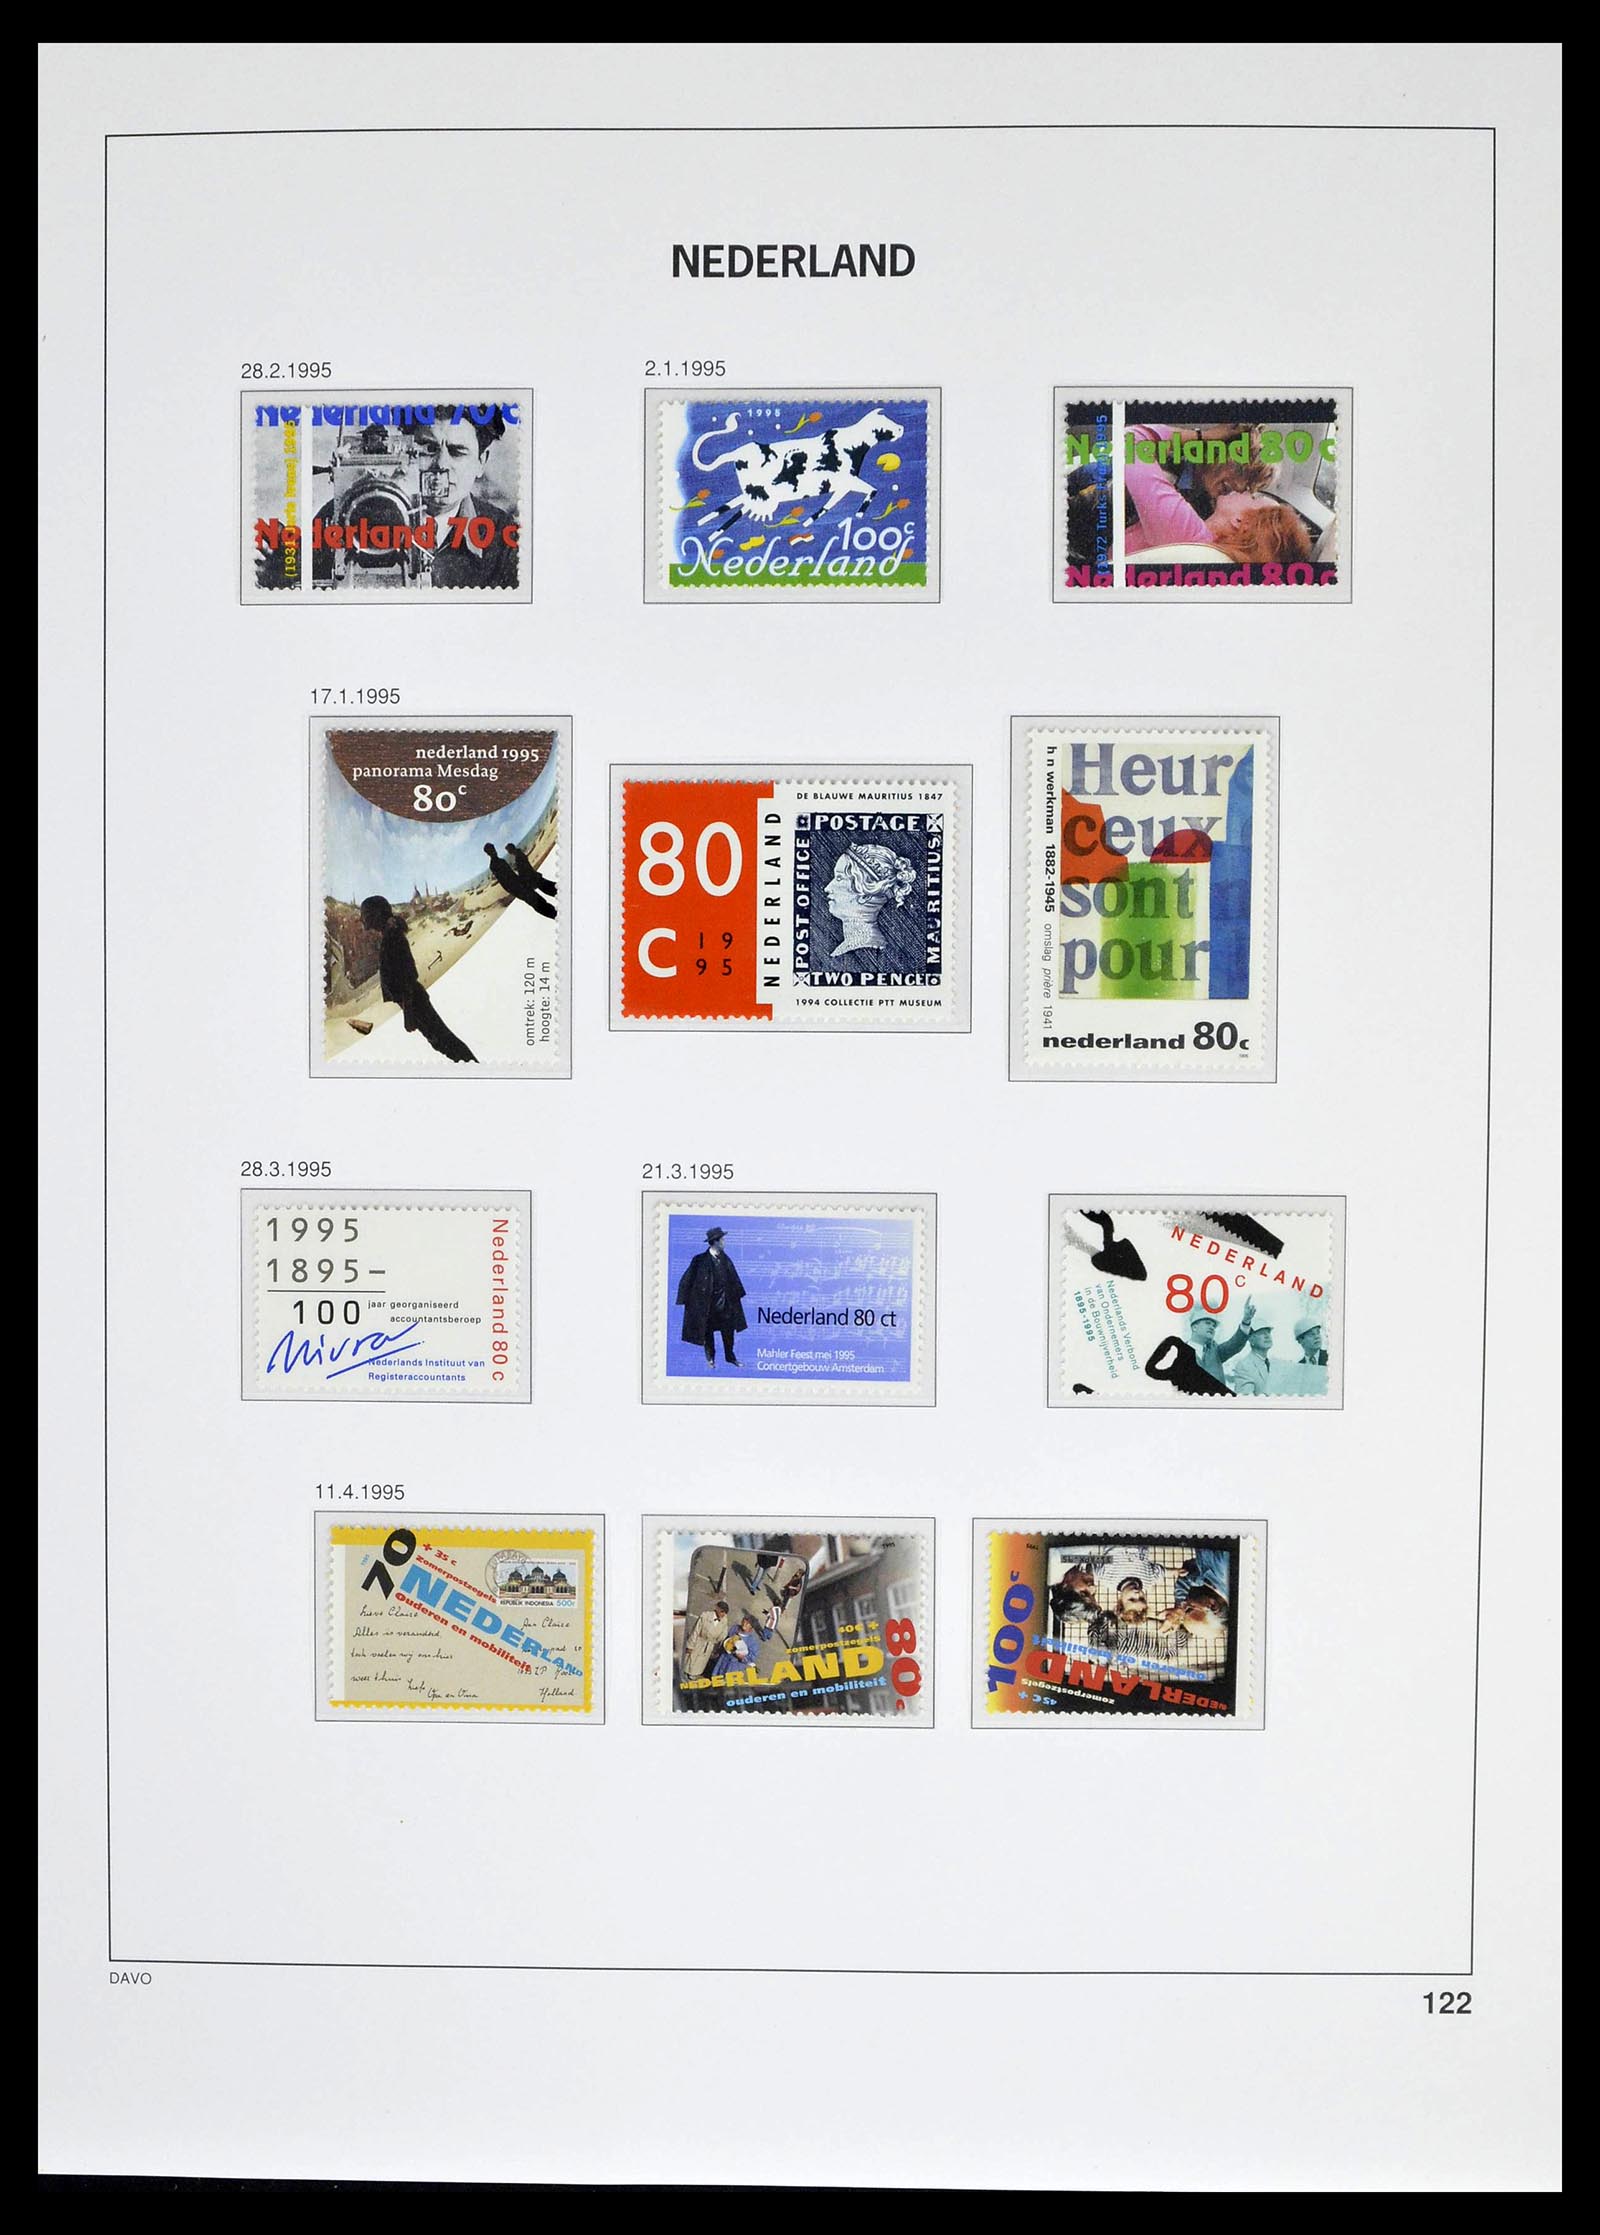 39136 0077 - Stamp collection 39136 Netherlands 1975-2020!